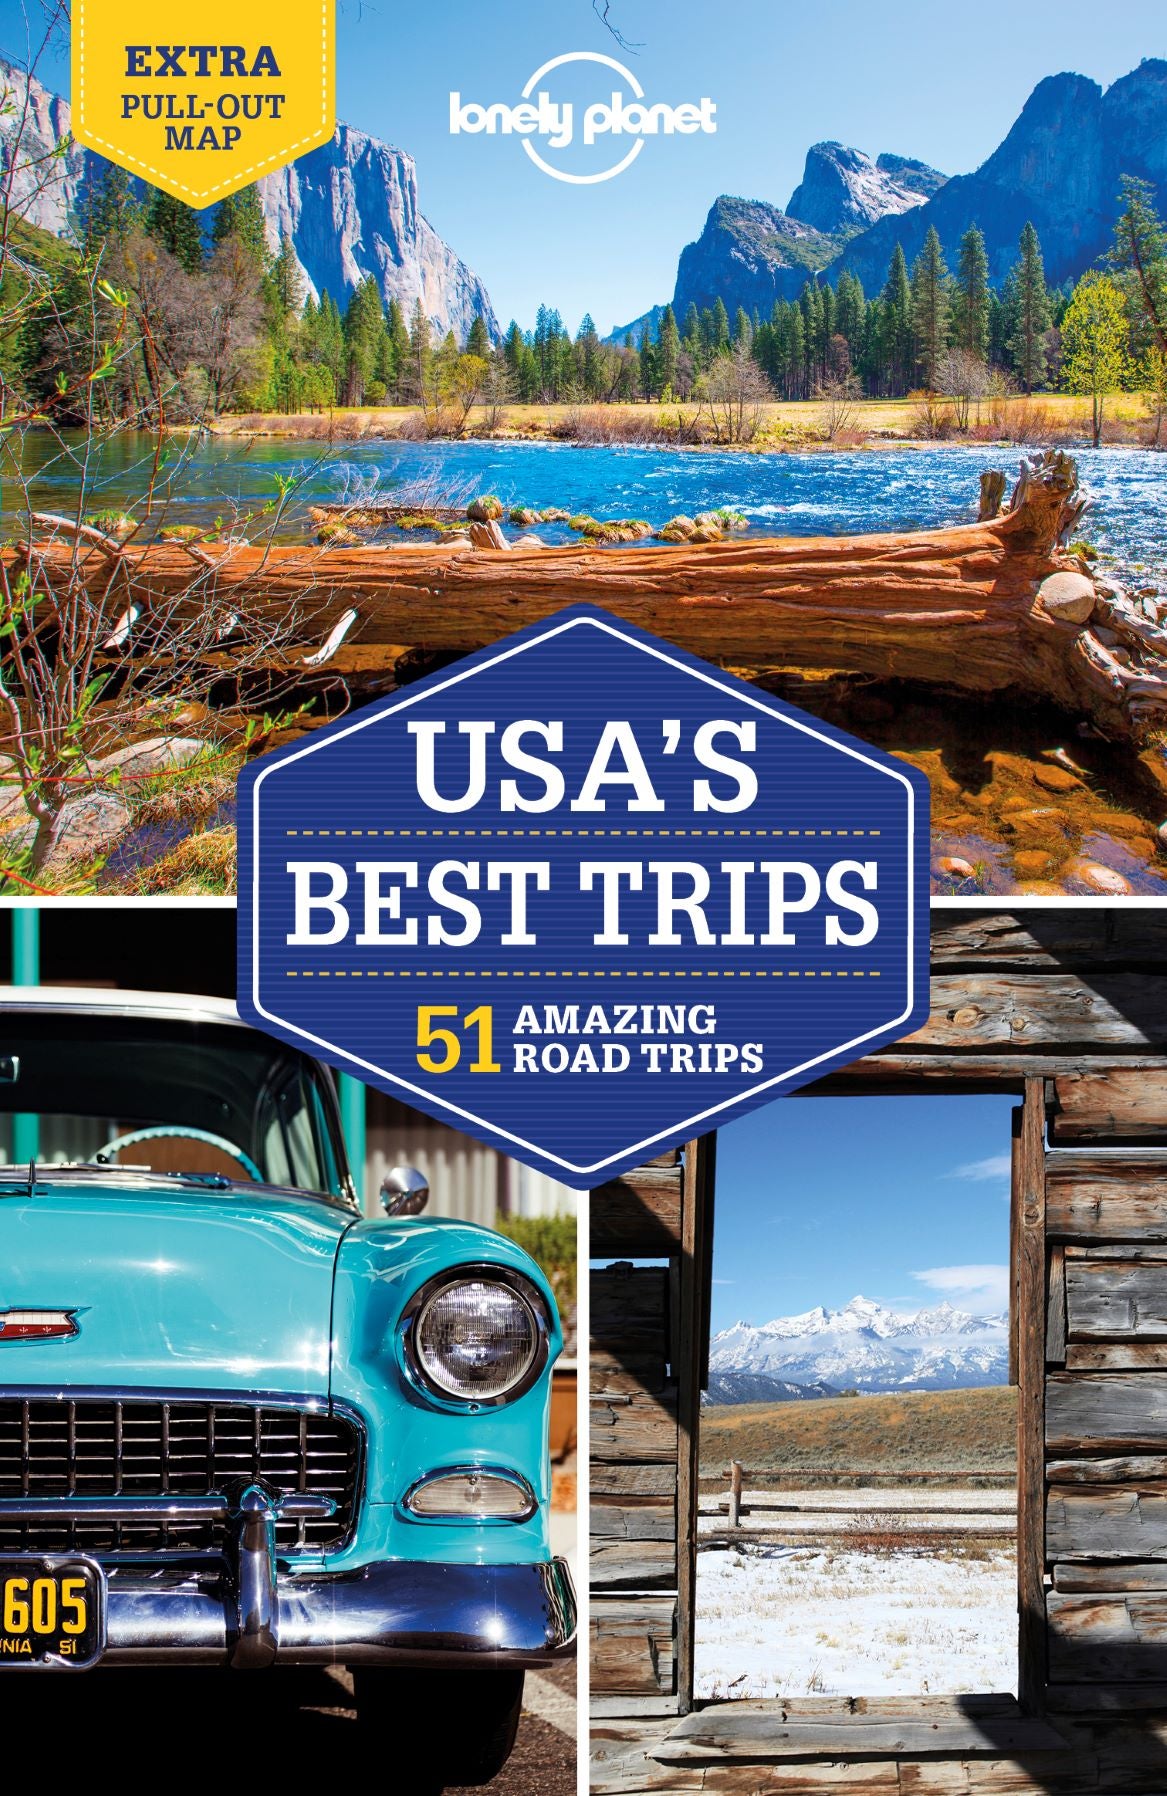 USA's　Armstrong,　by　Kate　Paper　Lonely　Lonely　Best　Planet,　Carolyn　Bain　Planet　Richmond,　Simon　Trips　Plus